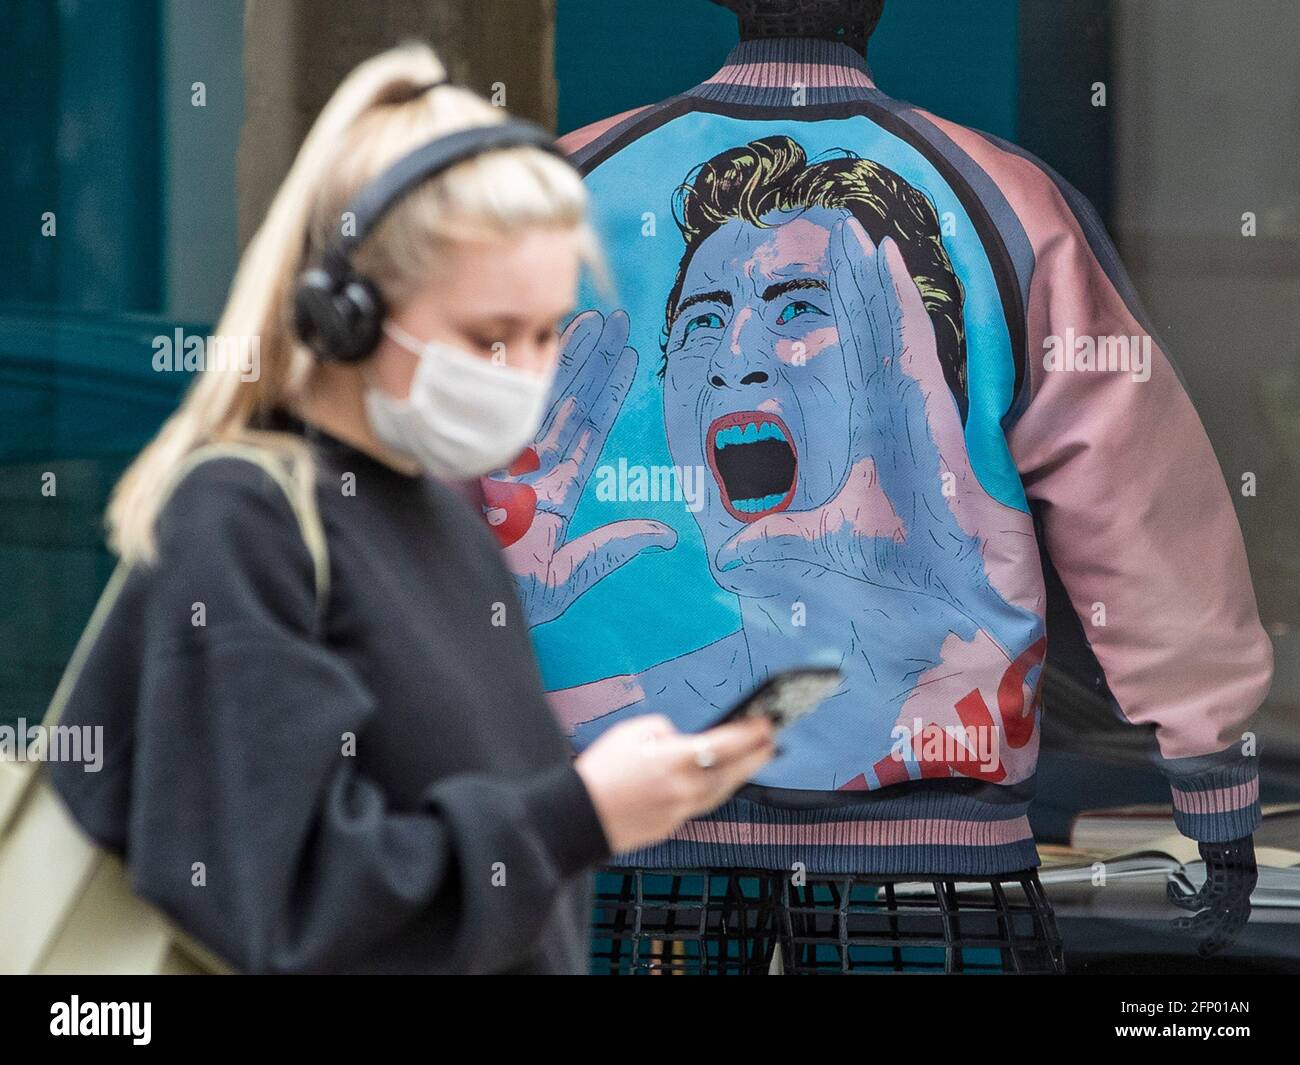 People walk past designer store Issey Miyake store in Central London with a jacket with face of man screaming in the background of the store. Stock Photo